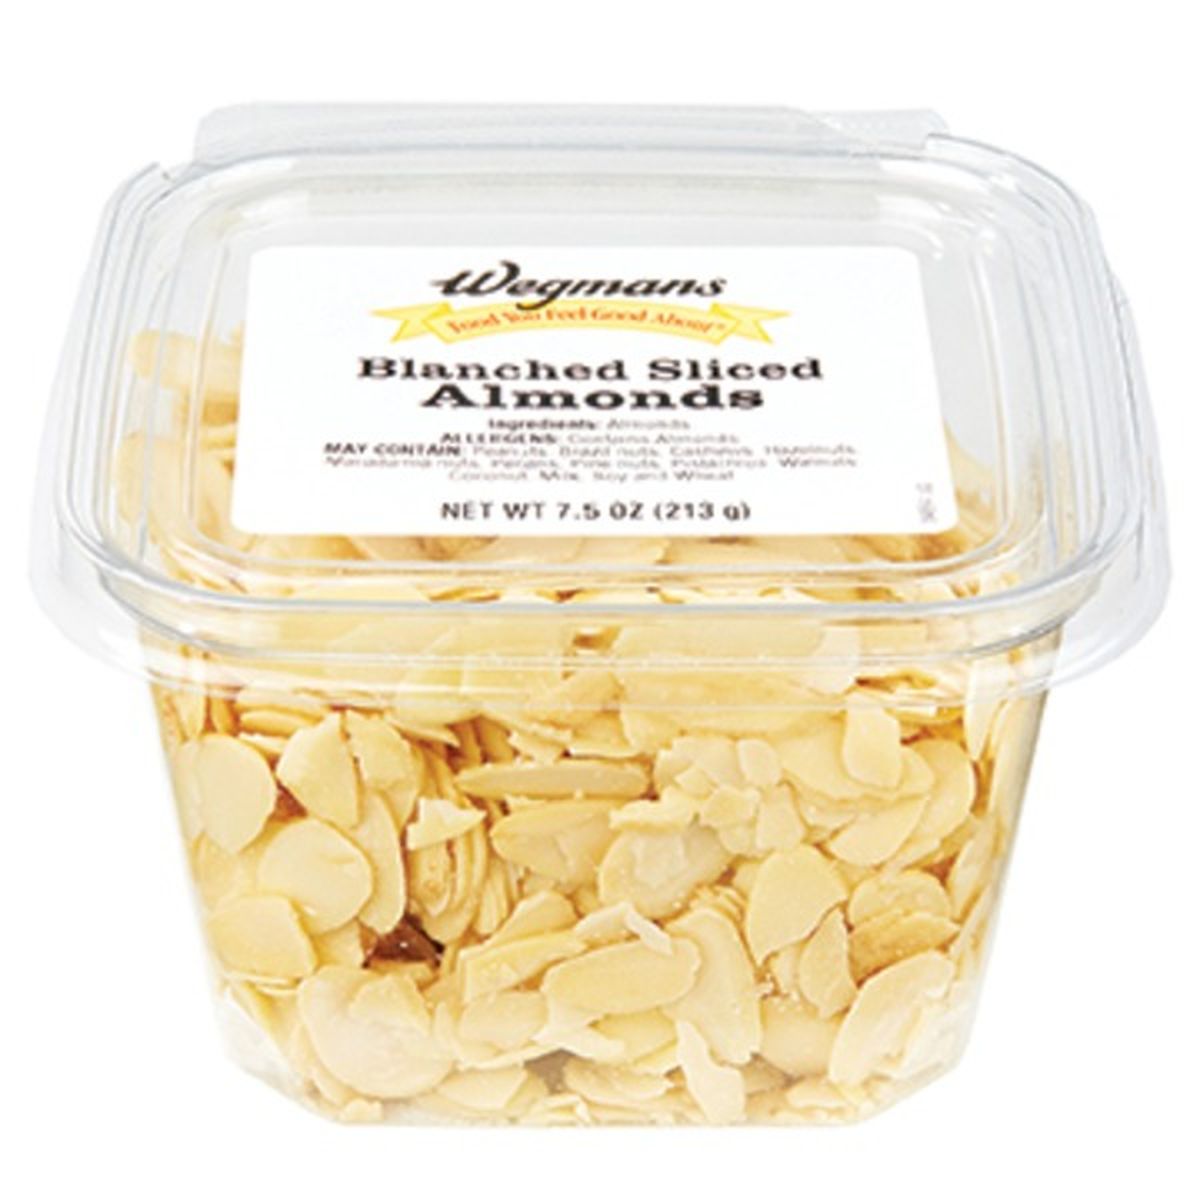 Calories in Wegmans Blanched Sliced Almonds